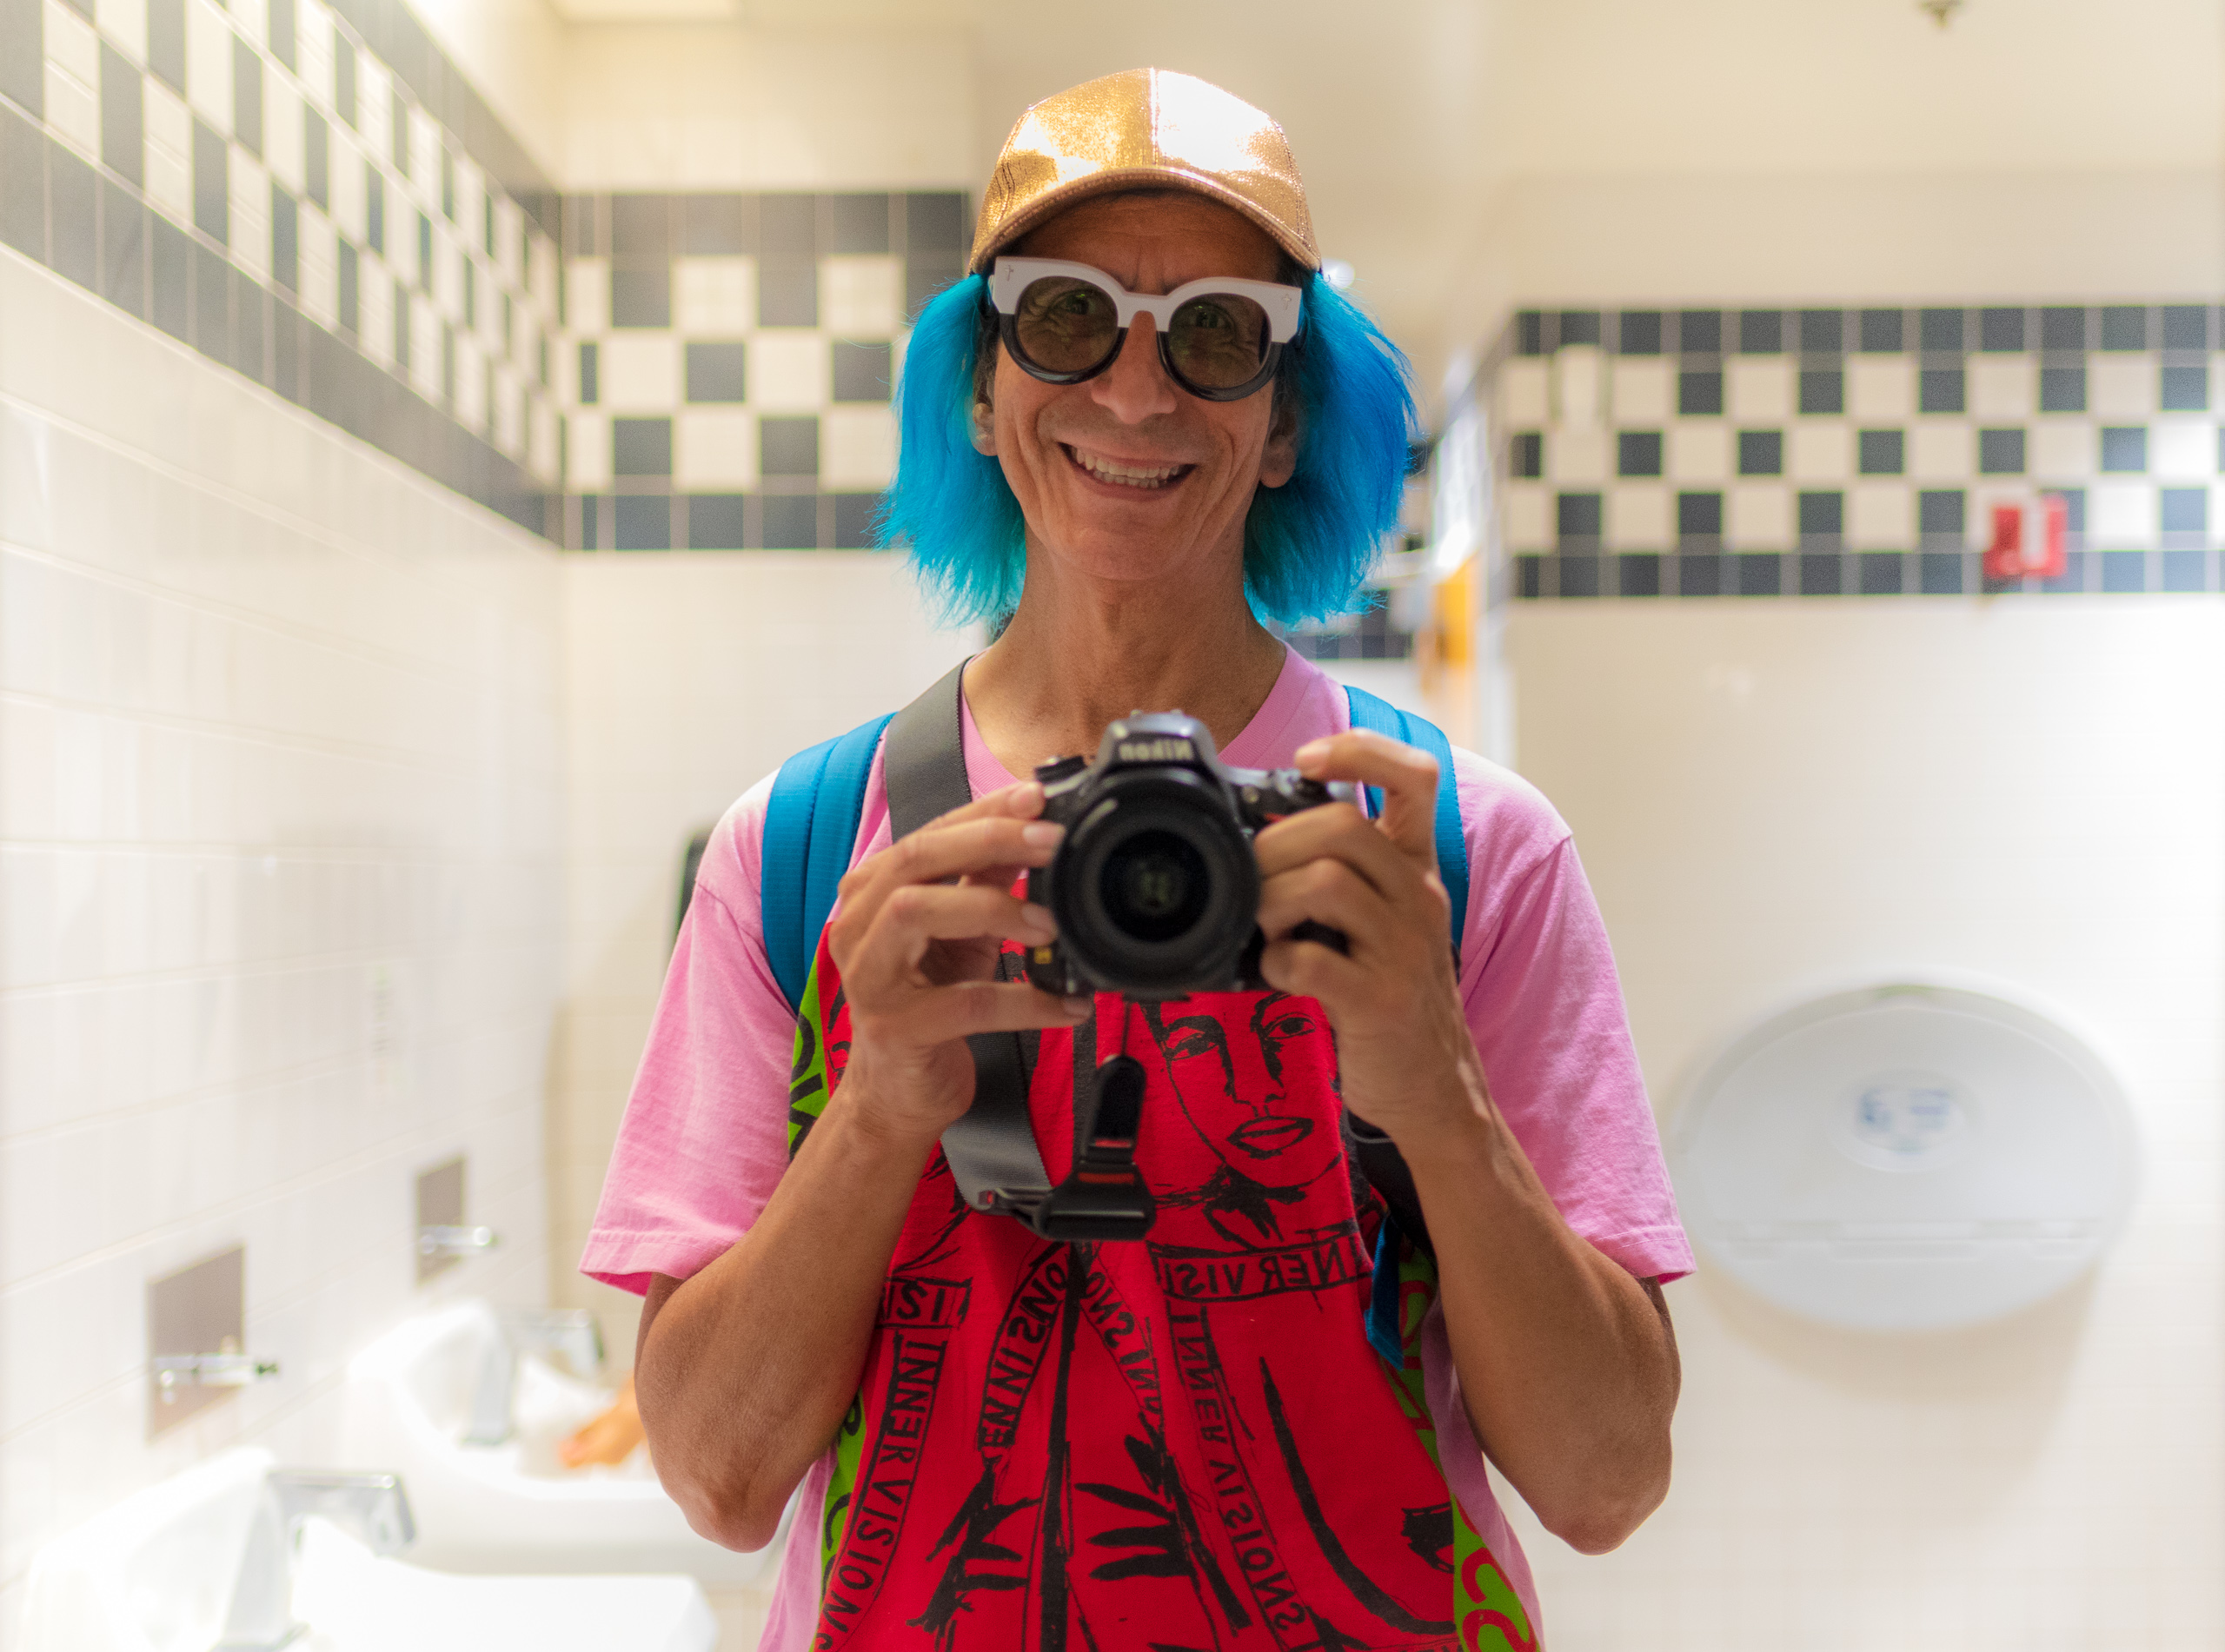 Glenn Zucman taking a selfie in the mirror of the men's restroom at the California Science Center in Exposition Park in Los Angeles